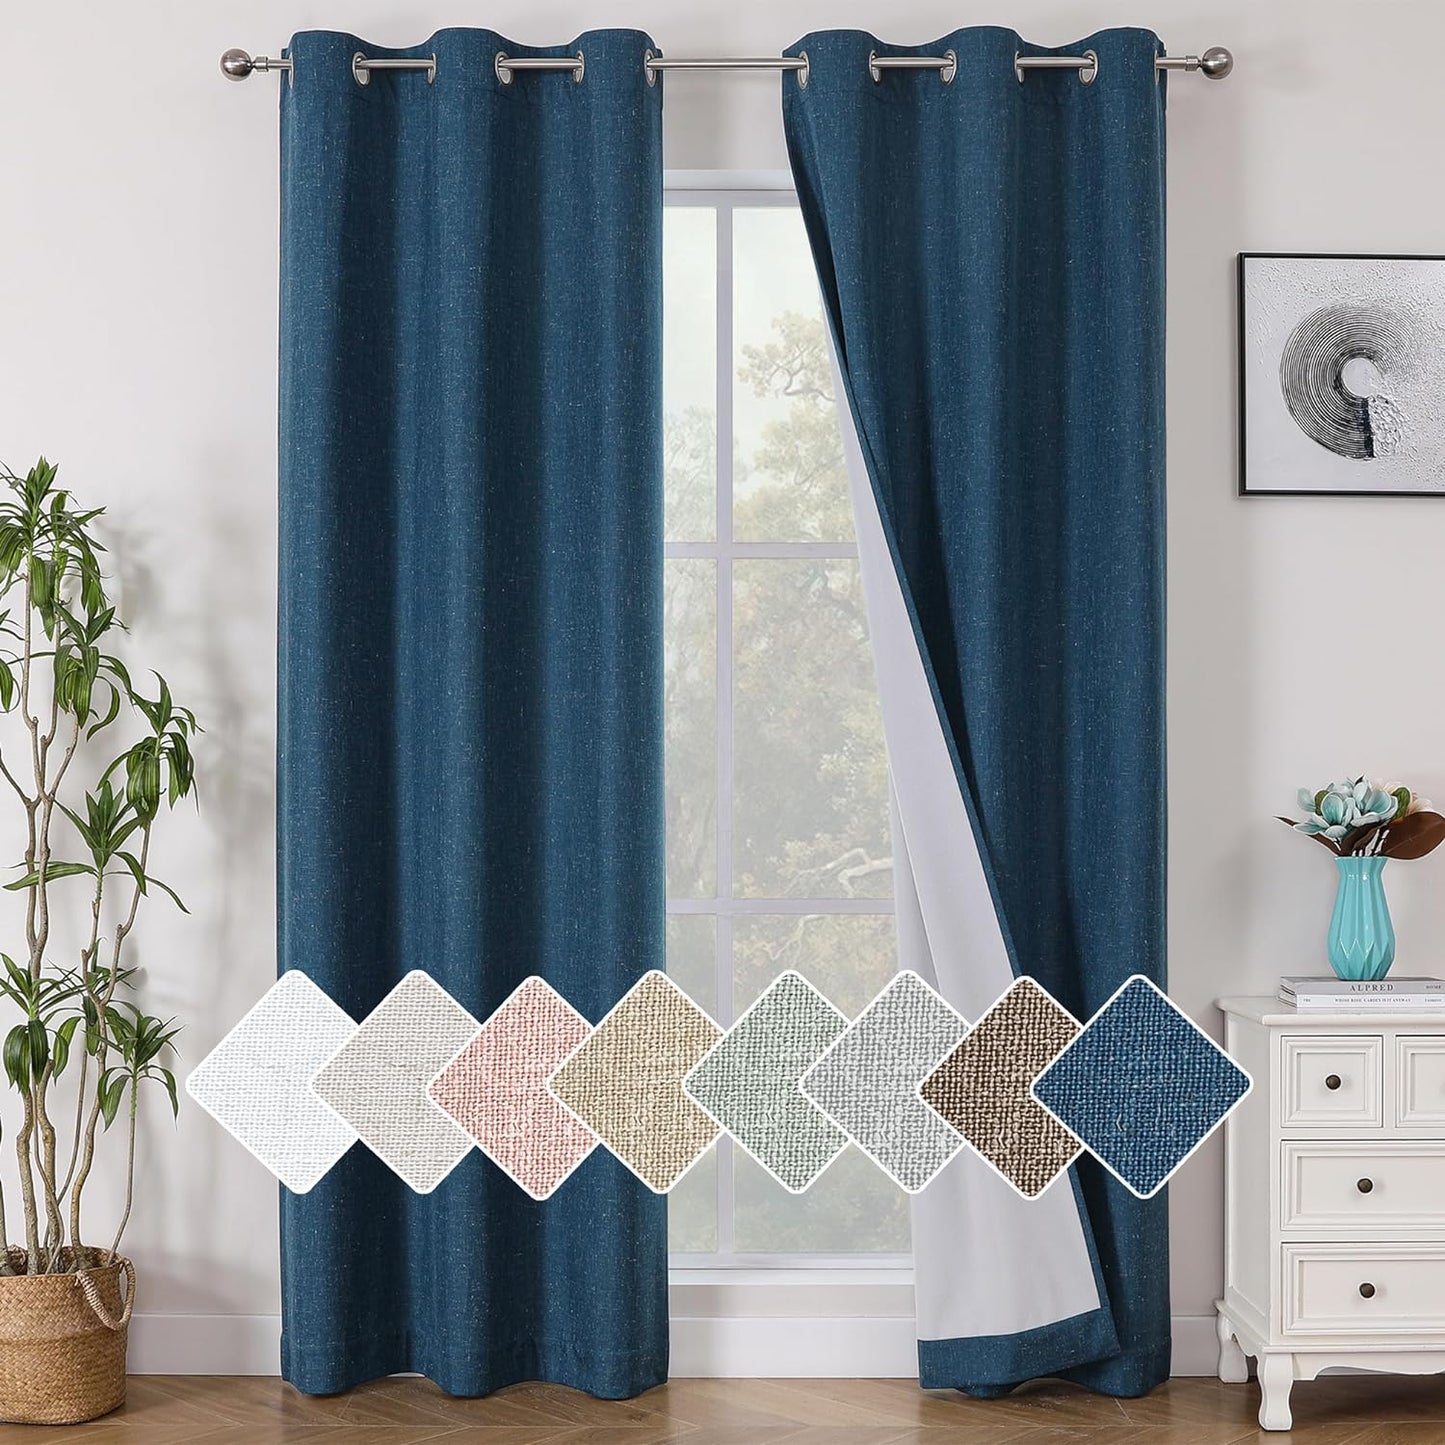 Jenny Ivory Beige Textured Linen 100% Blackout Curtains 63 Inch Length 2 Panels, Energy Saving Window Treatment Heavy Curtain Drapes for Bedroom/Living Room, Burlap Fabric Curtains, 38W  Simplebrand Navy Blue 38"W X 96"L 